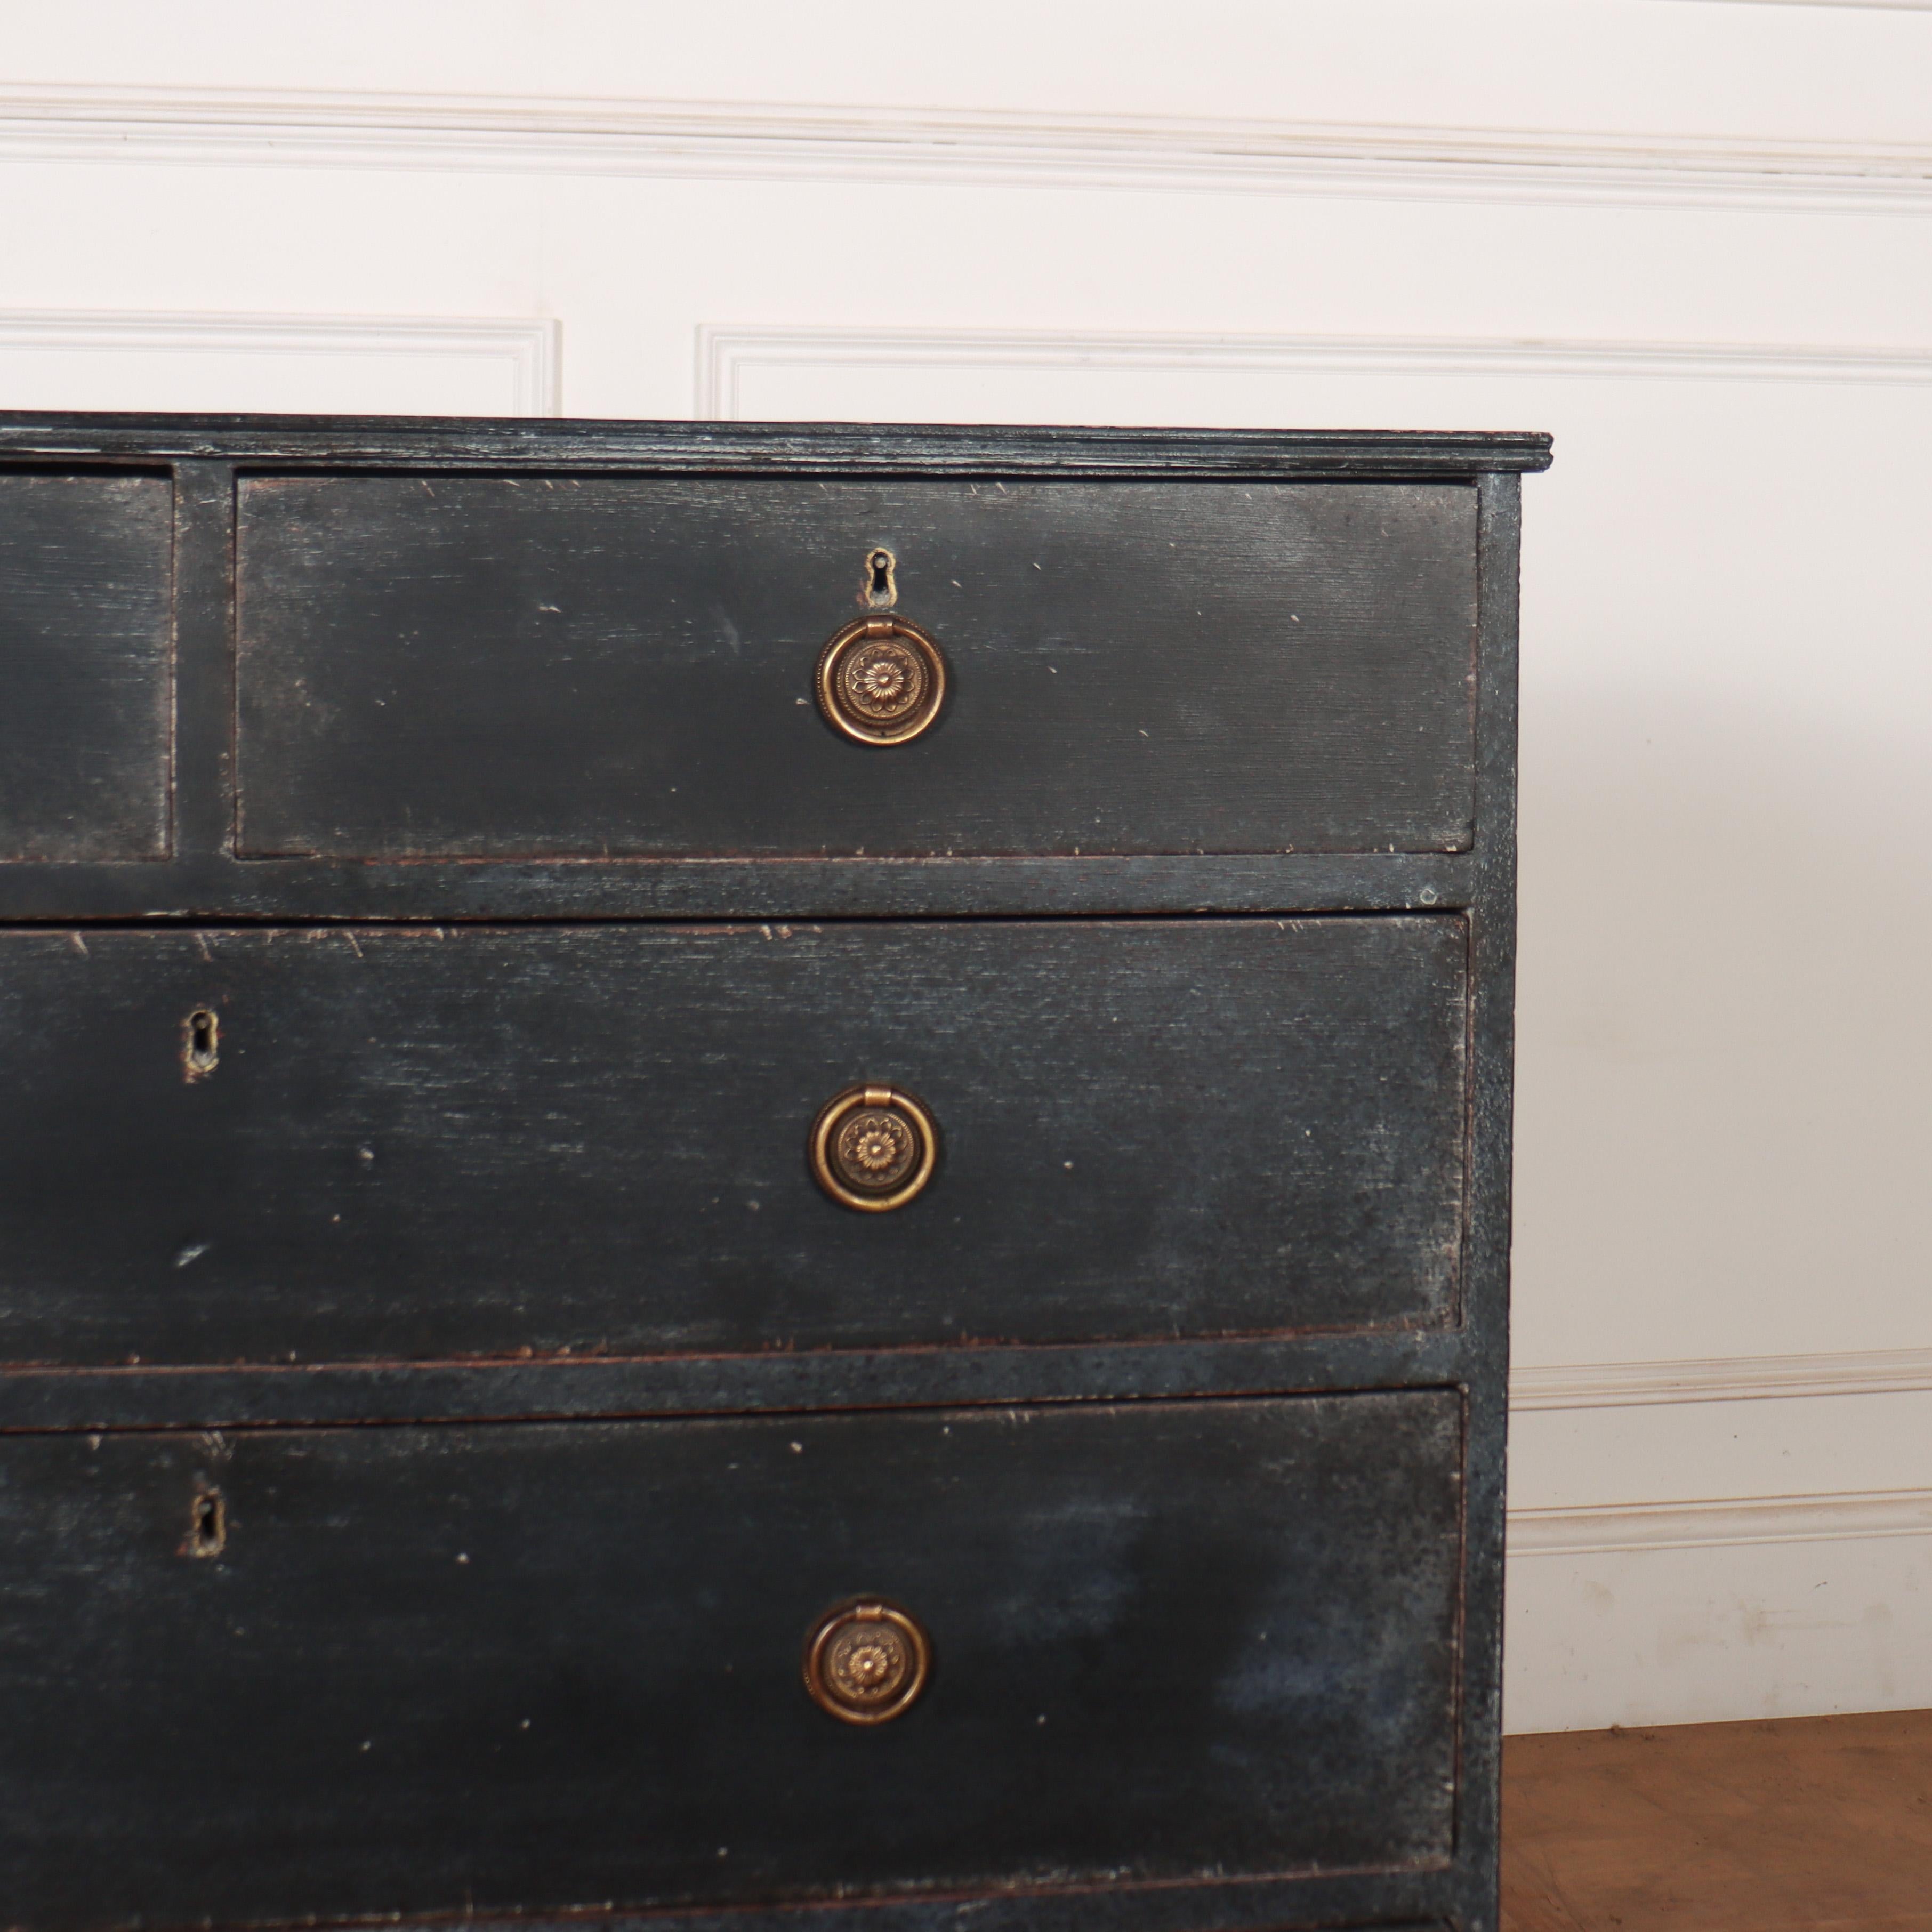 George IV English Painted Chest of Drawers